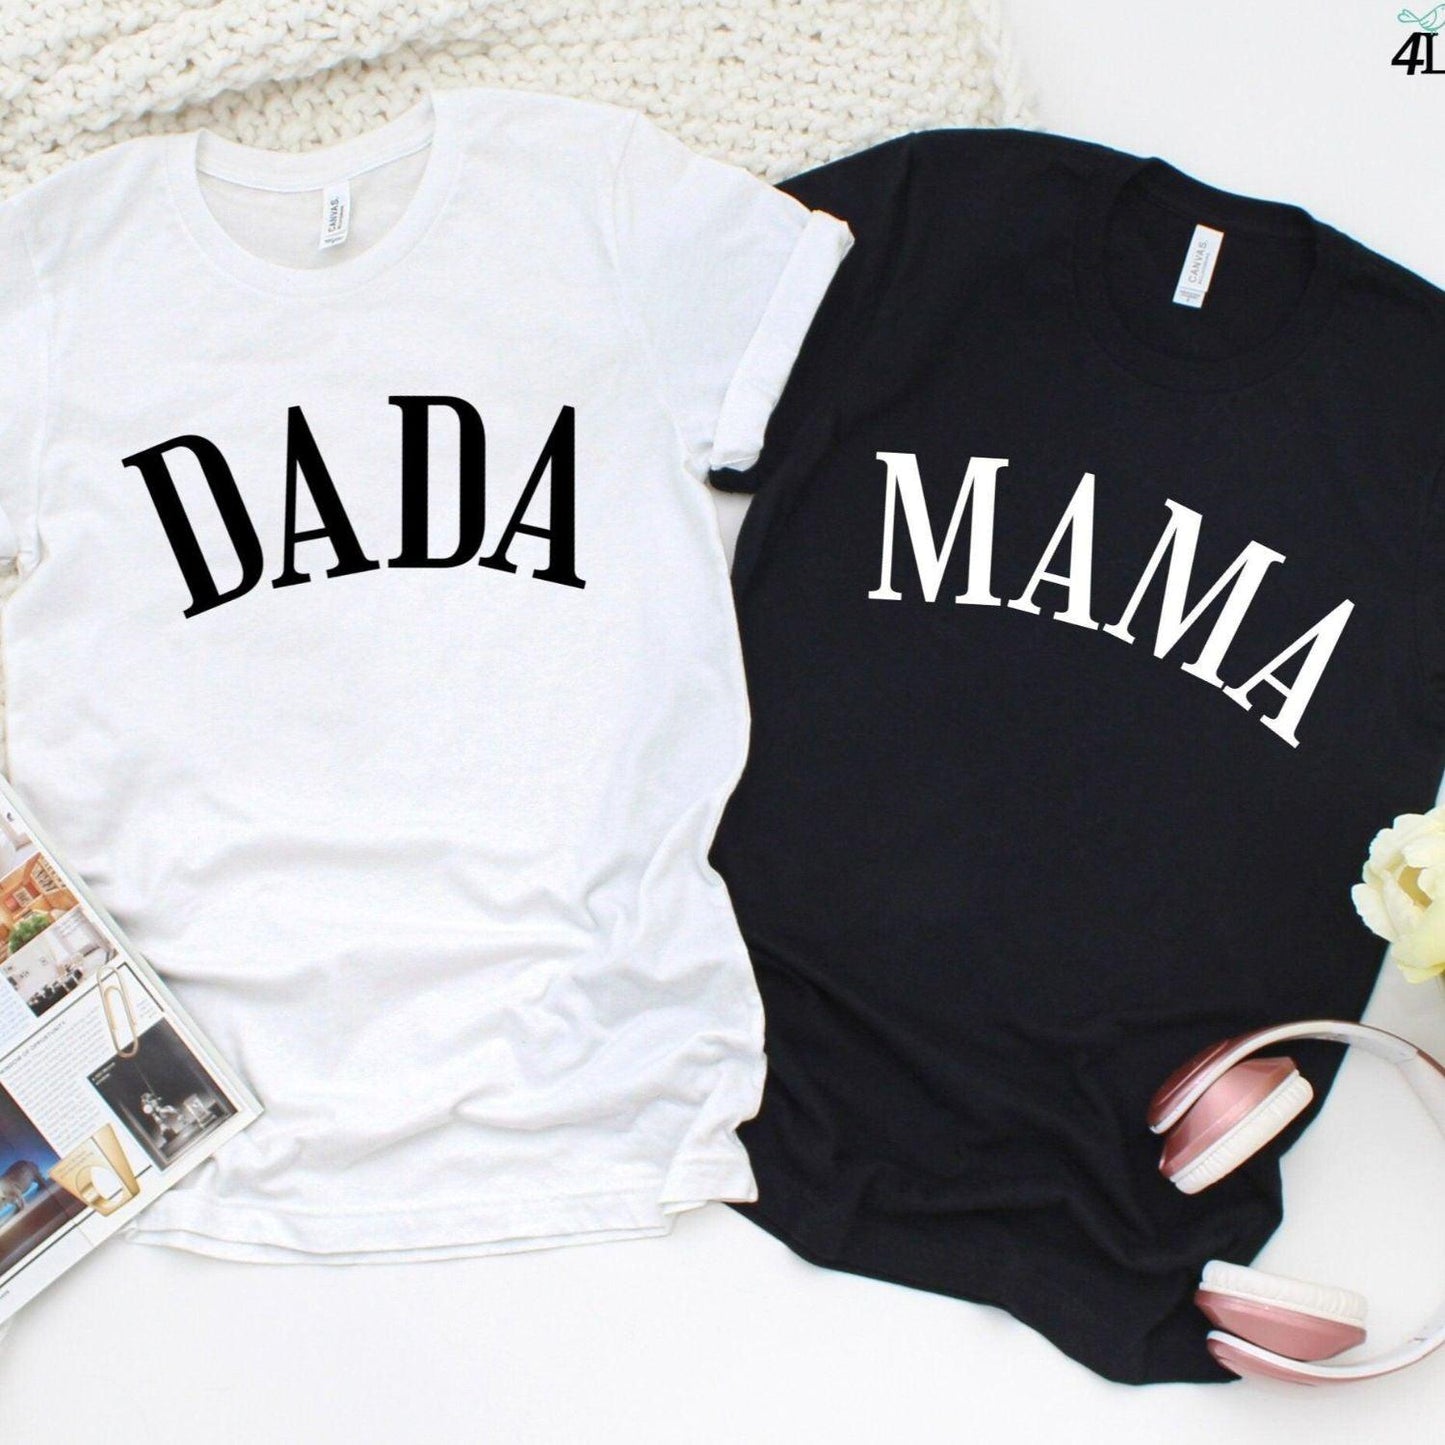 Matching Mama & Dada Set: Ideal Mother/Father's Day Outfits - Cozy & Stylish! - 4Lovebirds